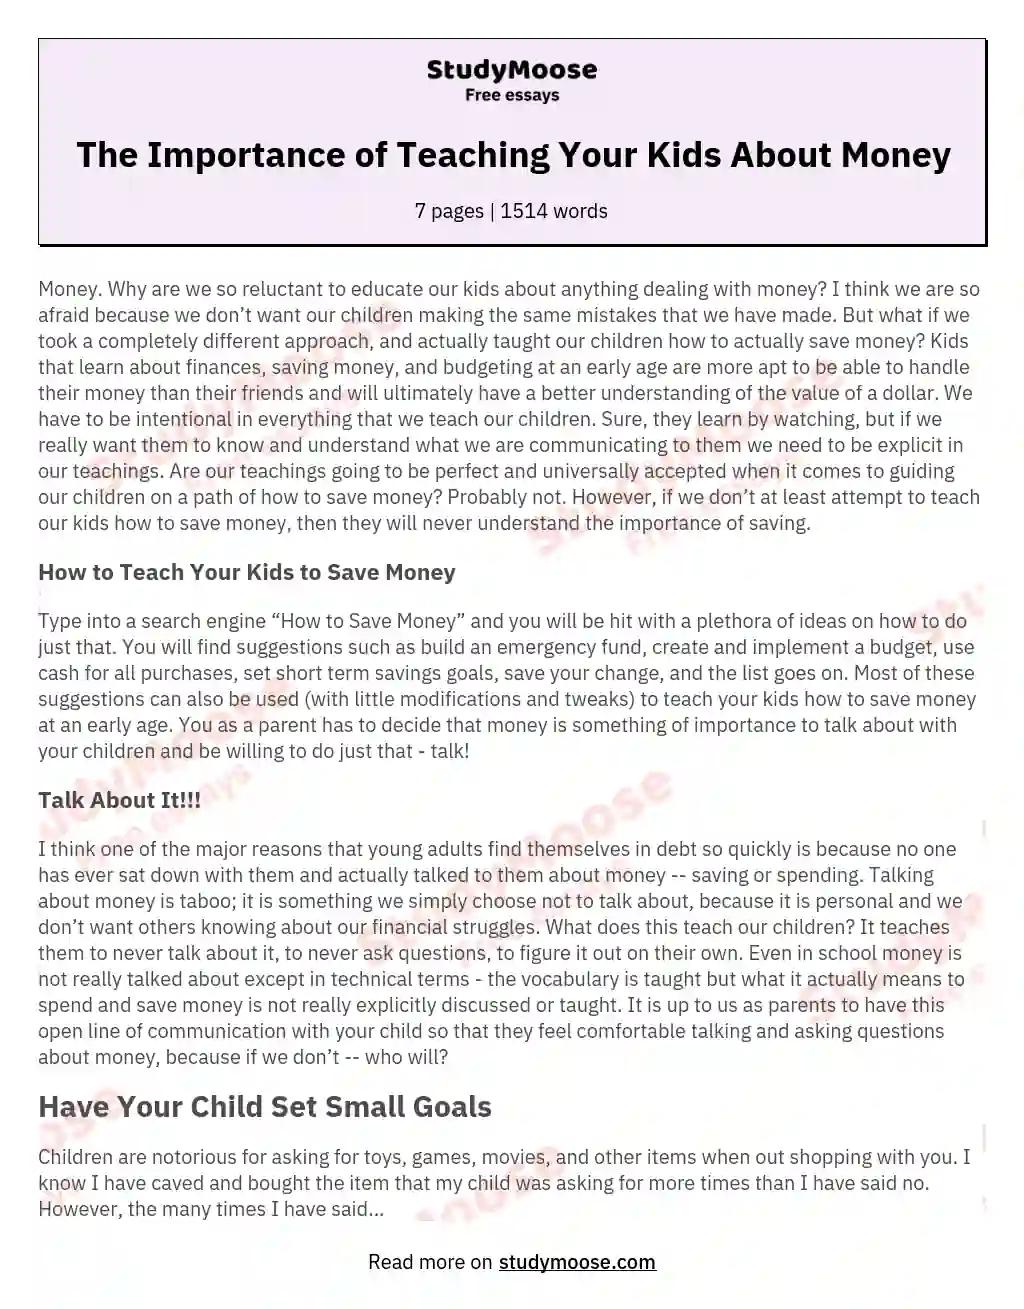 The Importance of Teaching Your Kids About Money essay